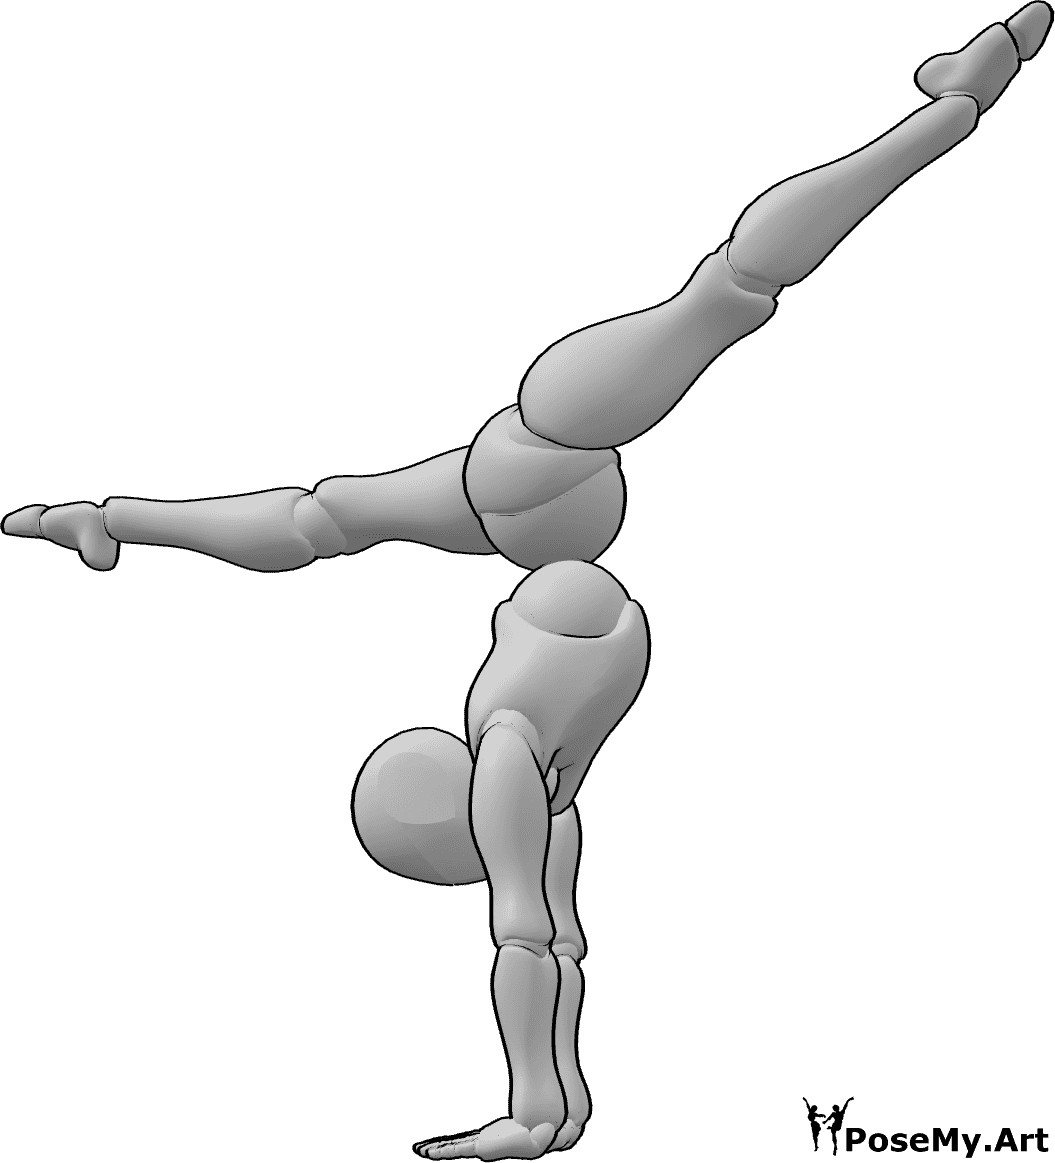 Pose Reference - Handstand front split pose - Female is standing on her hands and doing a front split